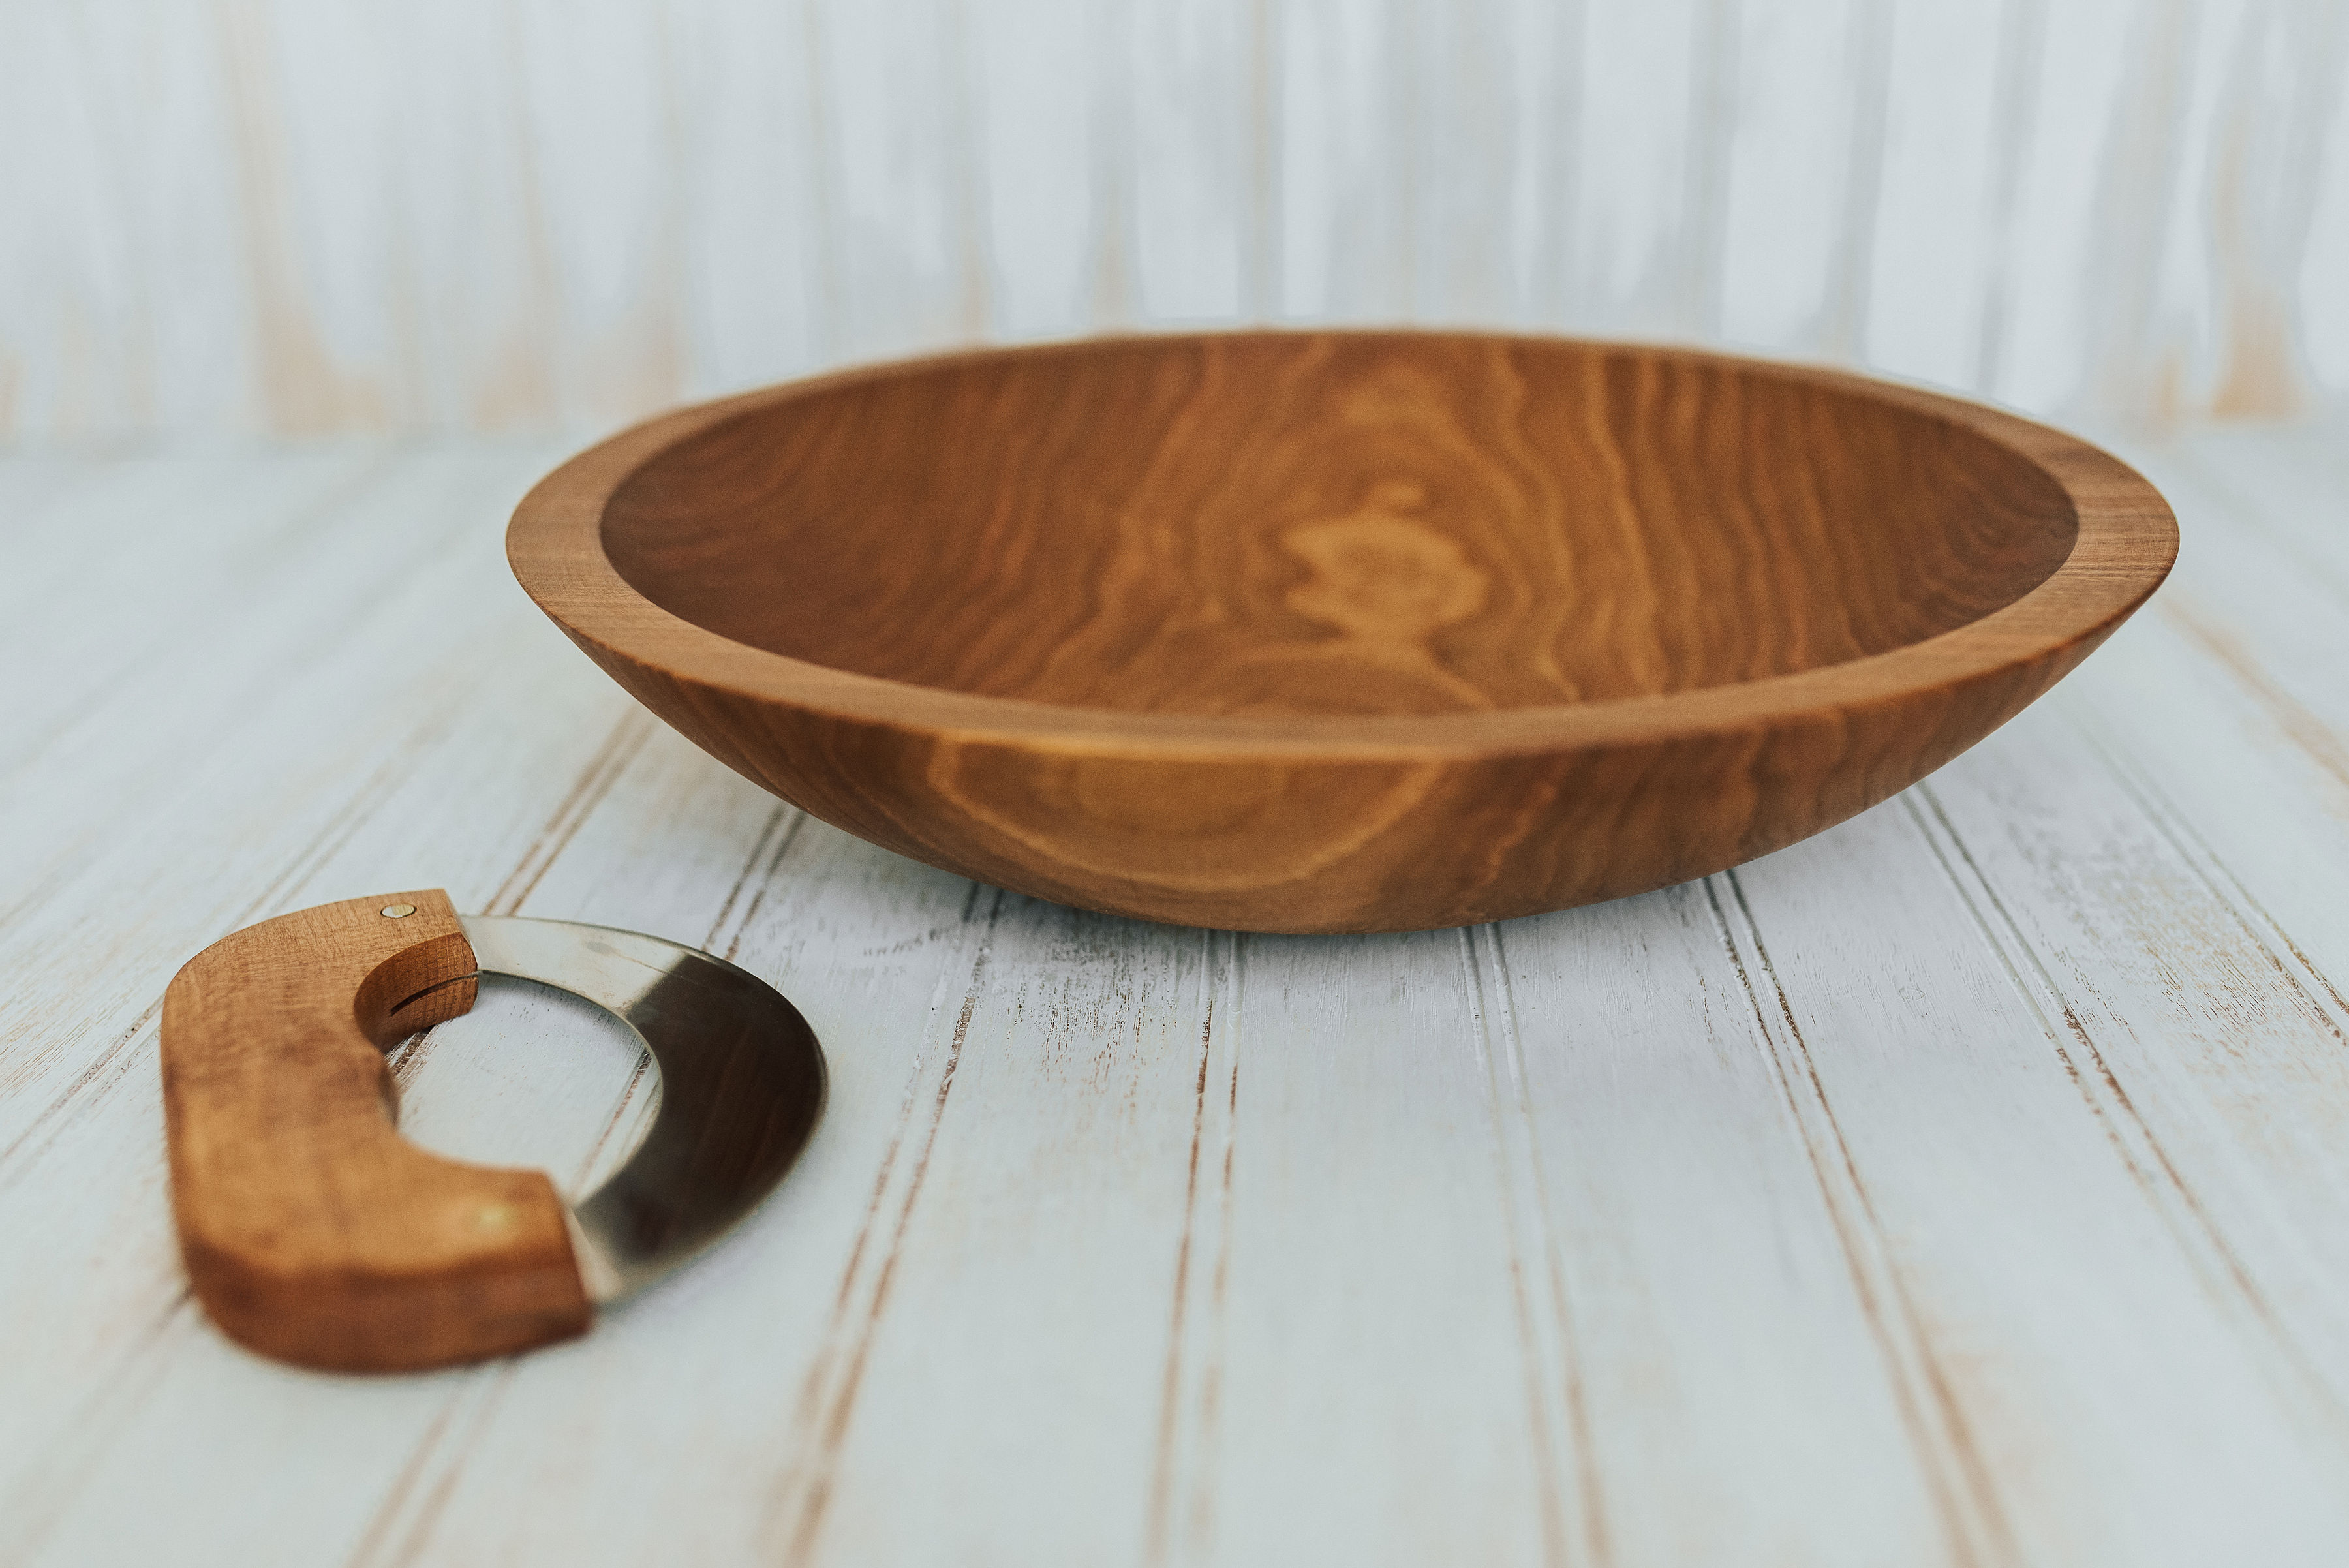 13.5-inch Large Wooden Chopping Bowl Set with Mezzaluna Knife